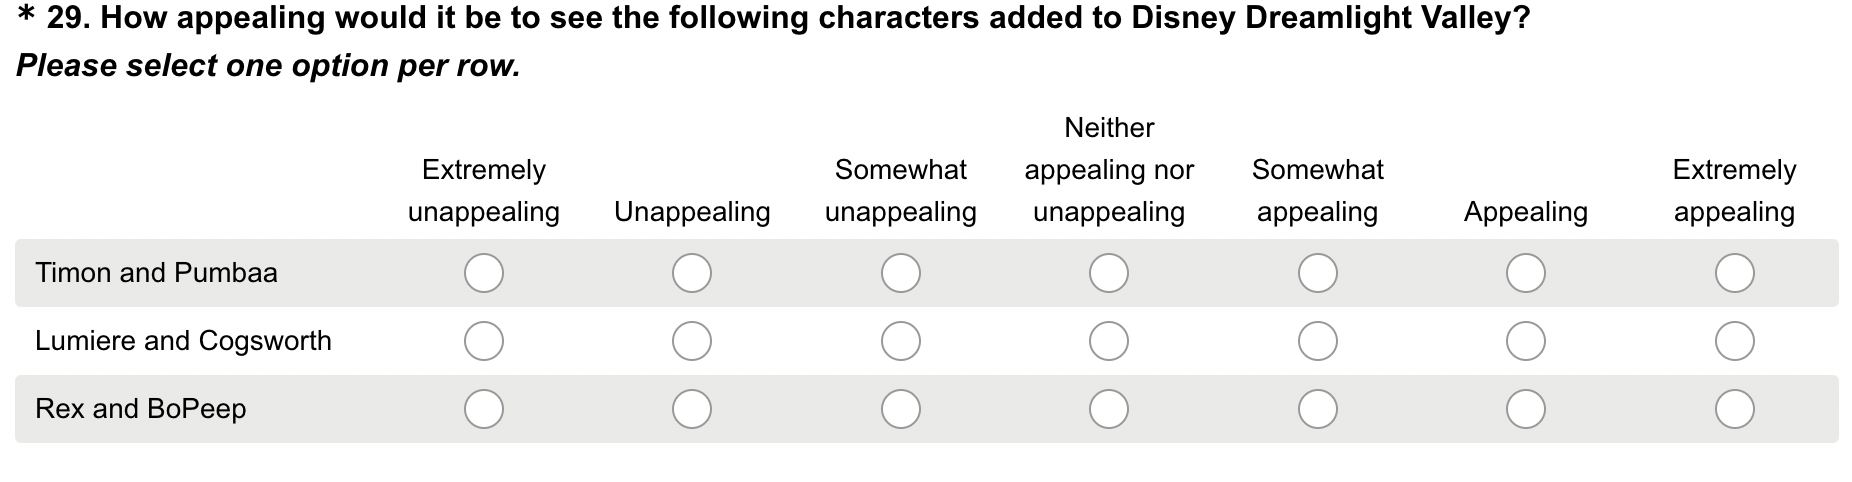 dreamlight-valley-character-survey.png